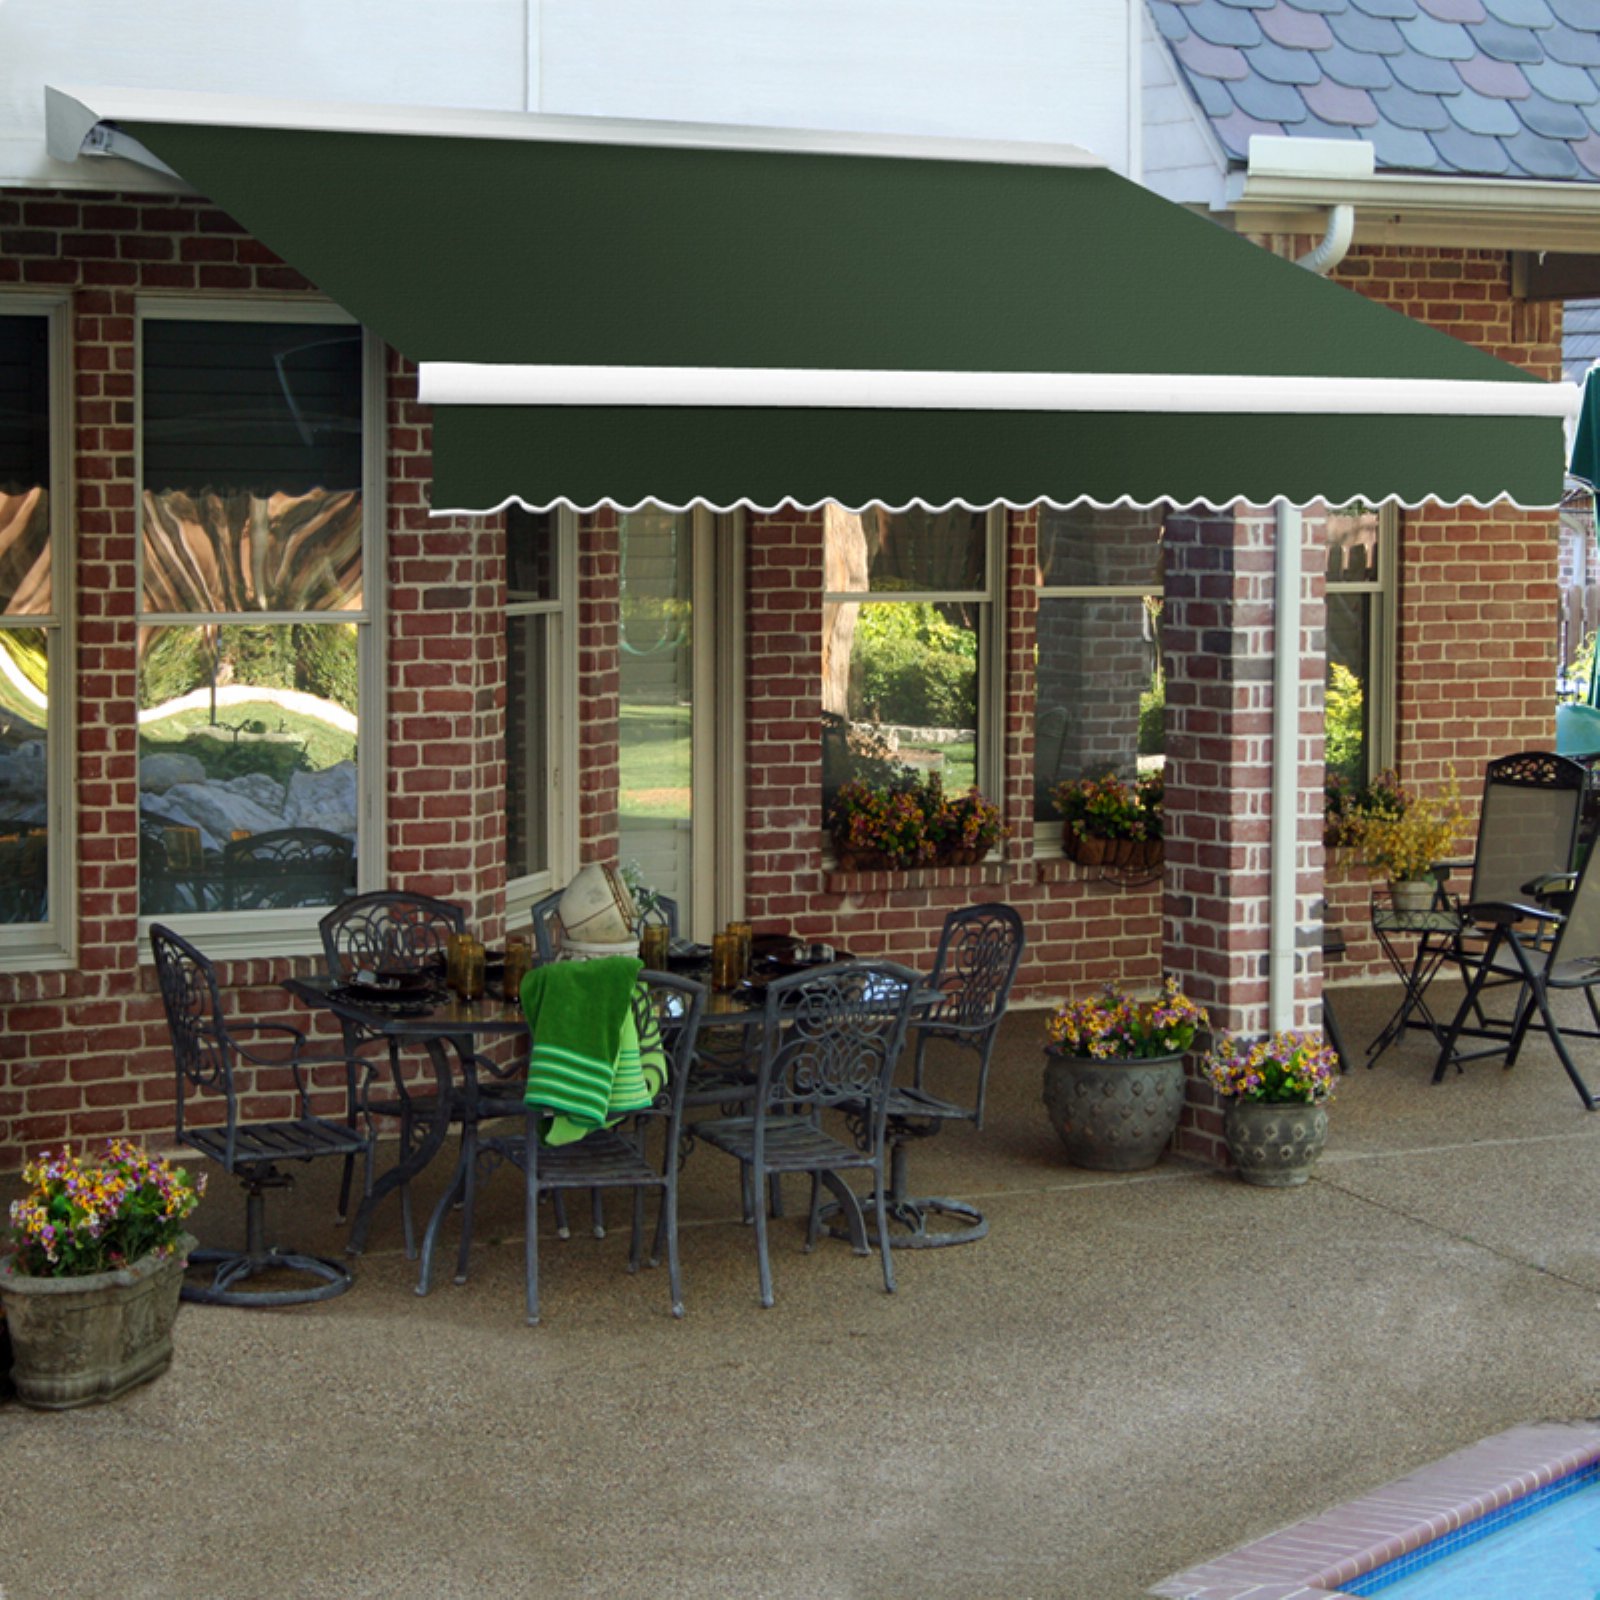 Awntech DESTIN 10 ft. Motorized Retractable Awning - image 1 of 1